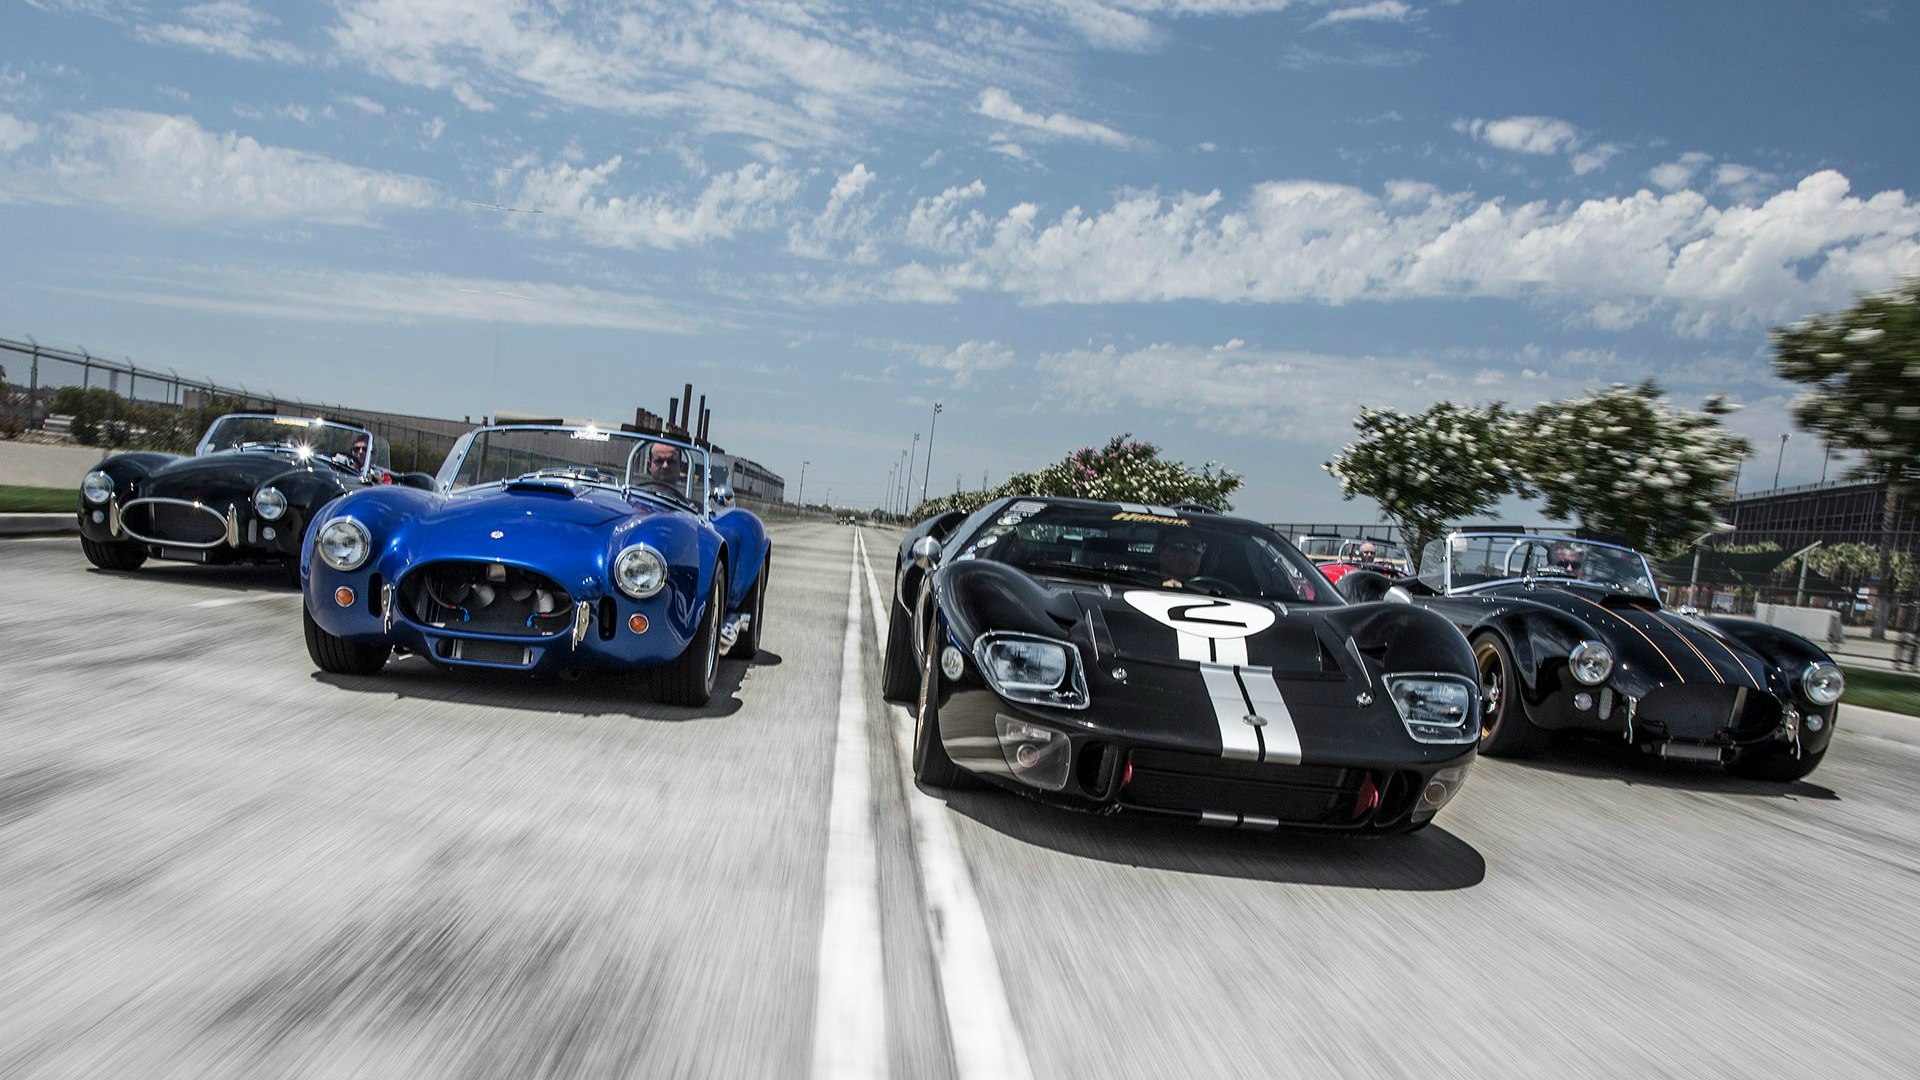 Автомобили и другая техника. Ford Shelby Cobra. Ford gt40 Shelby. Shelby Cobra gt 40. Ford gt40 Superformance.